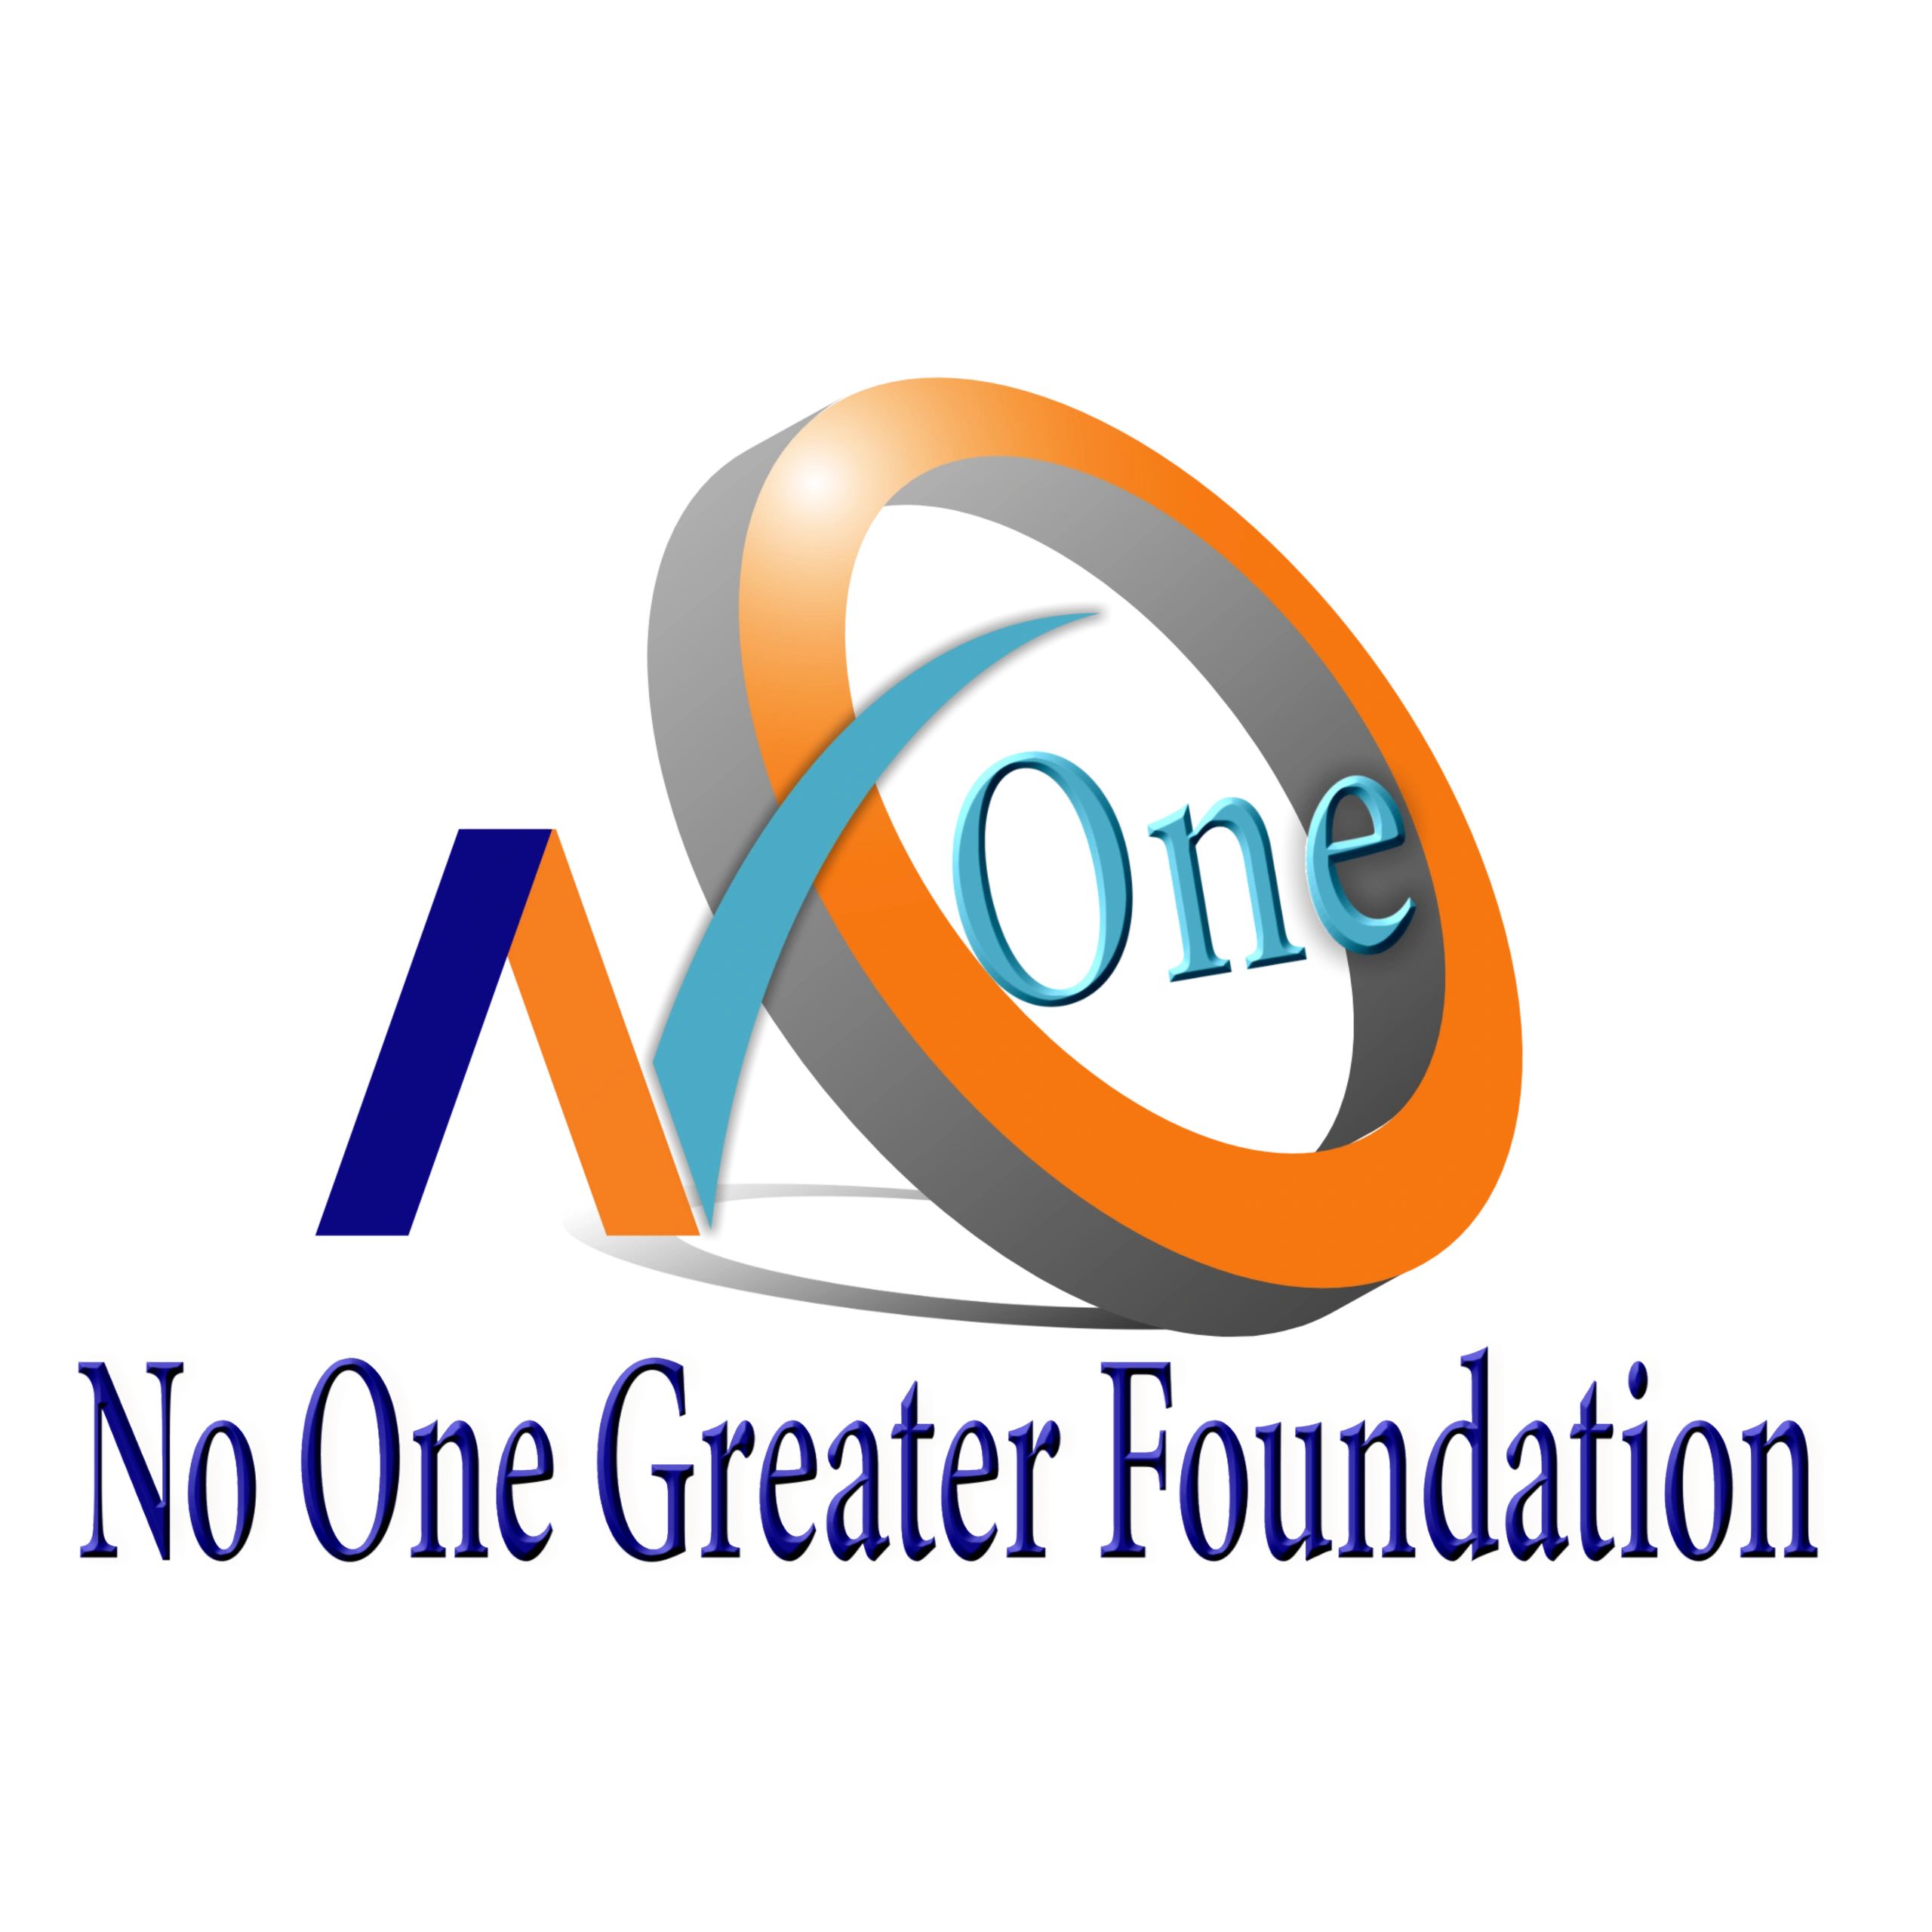 No One Greater Foundation - Home